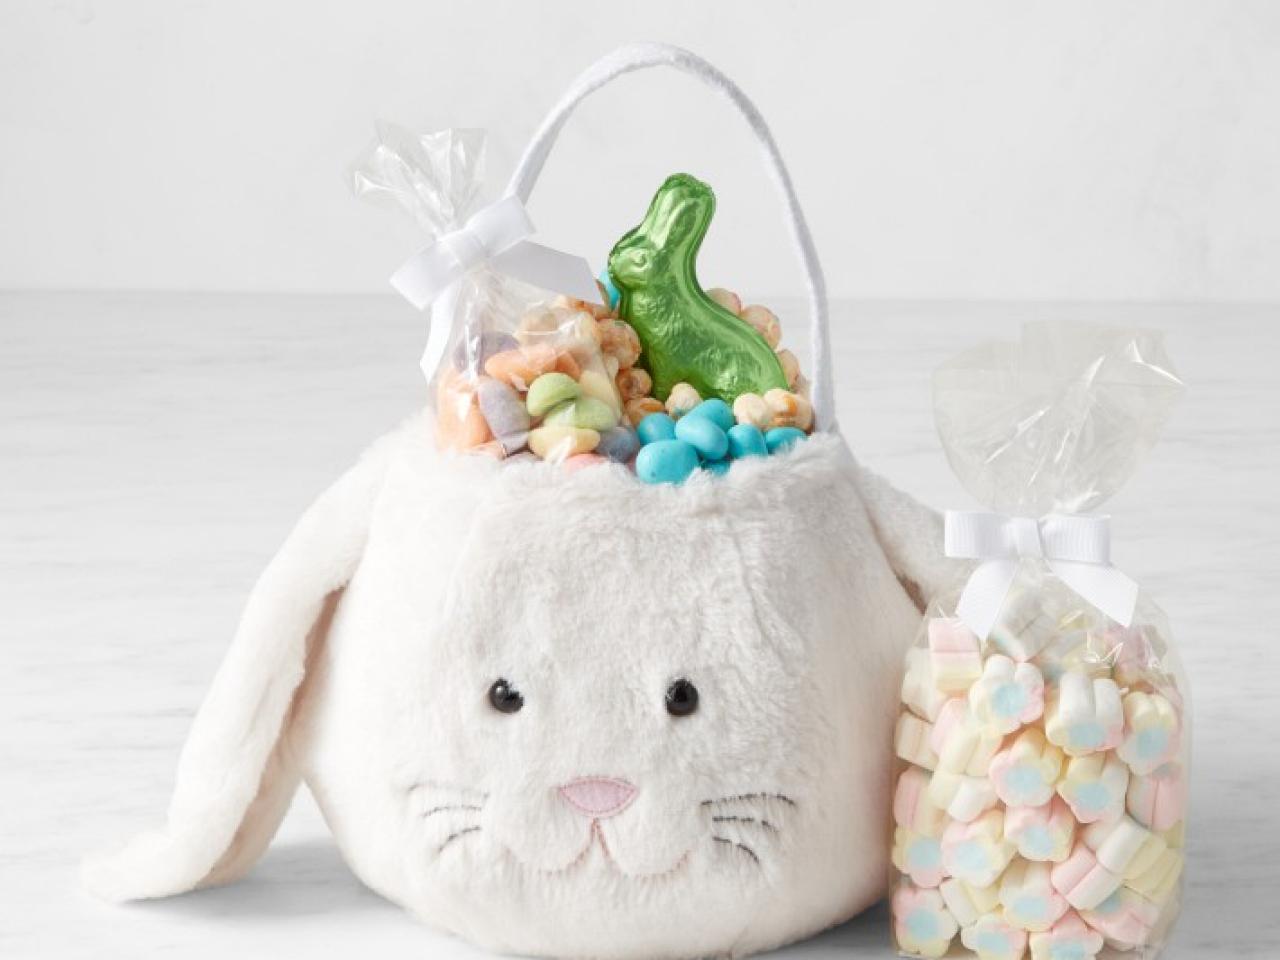 Candy and Plush Holiday Mega Basket by